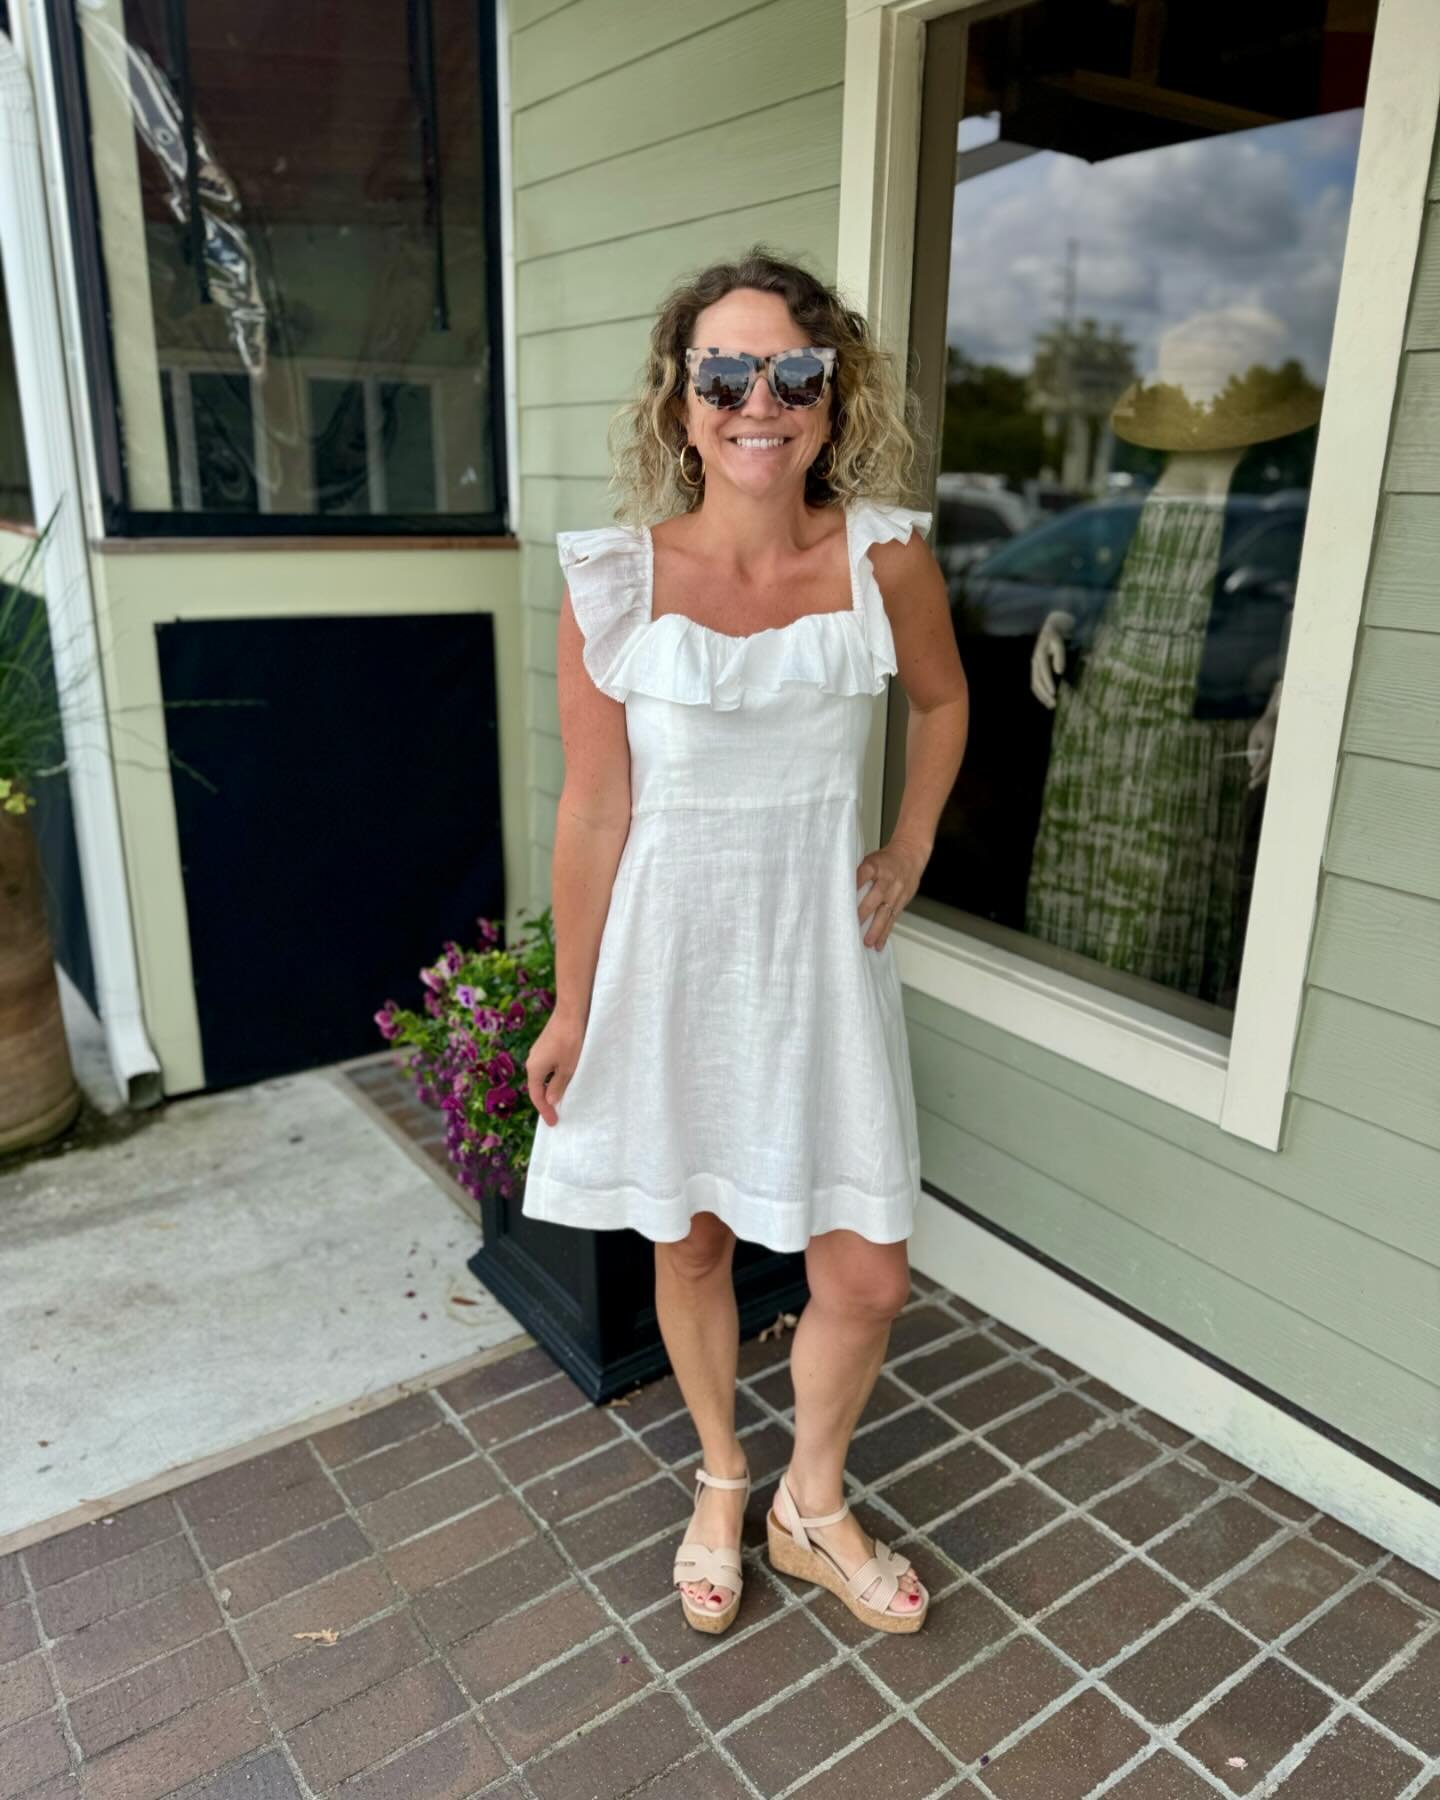 Graduation season is here 👩&zwj;🎓 come shop all our white dresses for your special occasion! 🤍🤍

👉🏼Head to our stories for details! Call for availability! 

#consigningwomen #consignment #cw #consign #consigning #shop #shopping #spring #summer 